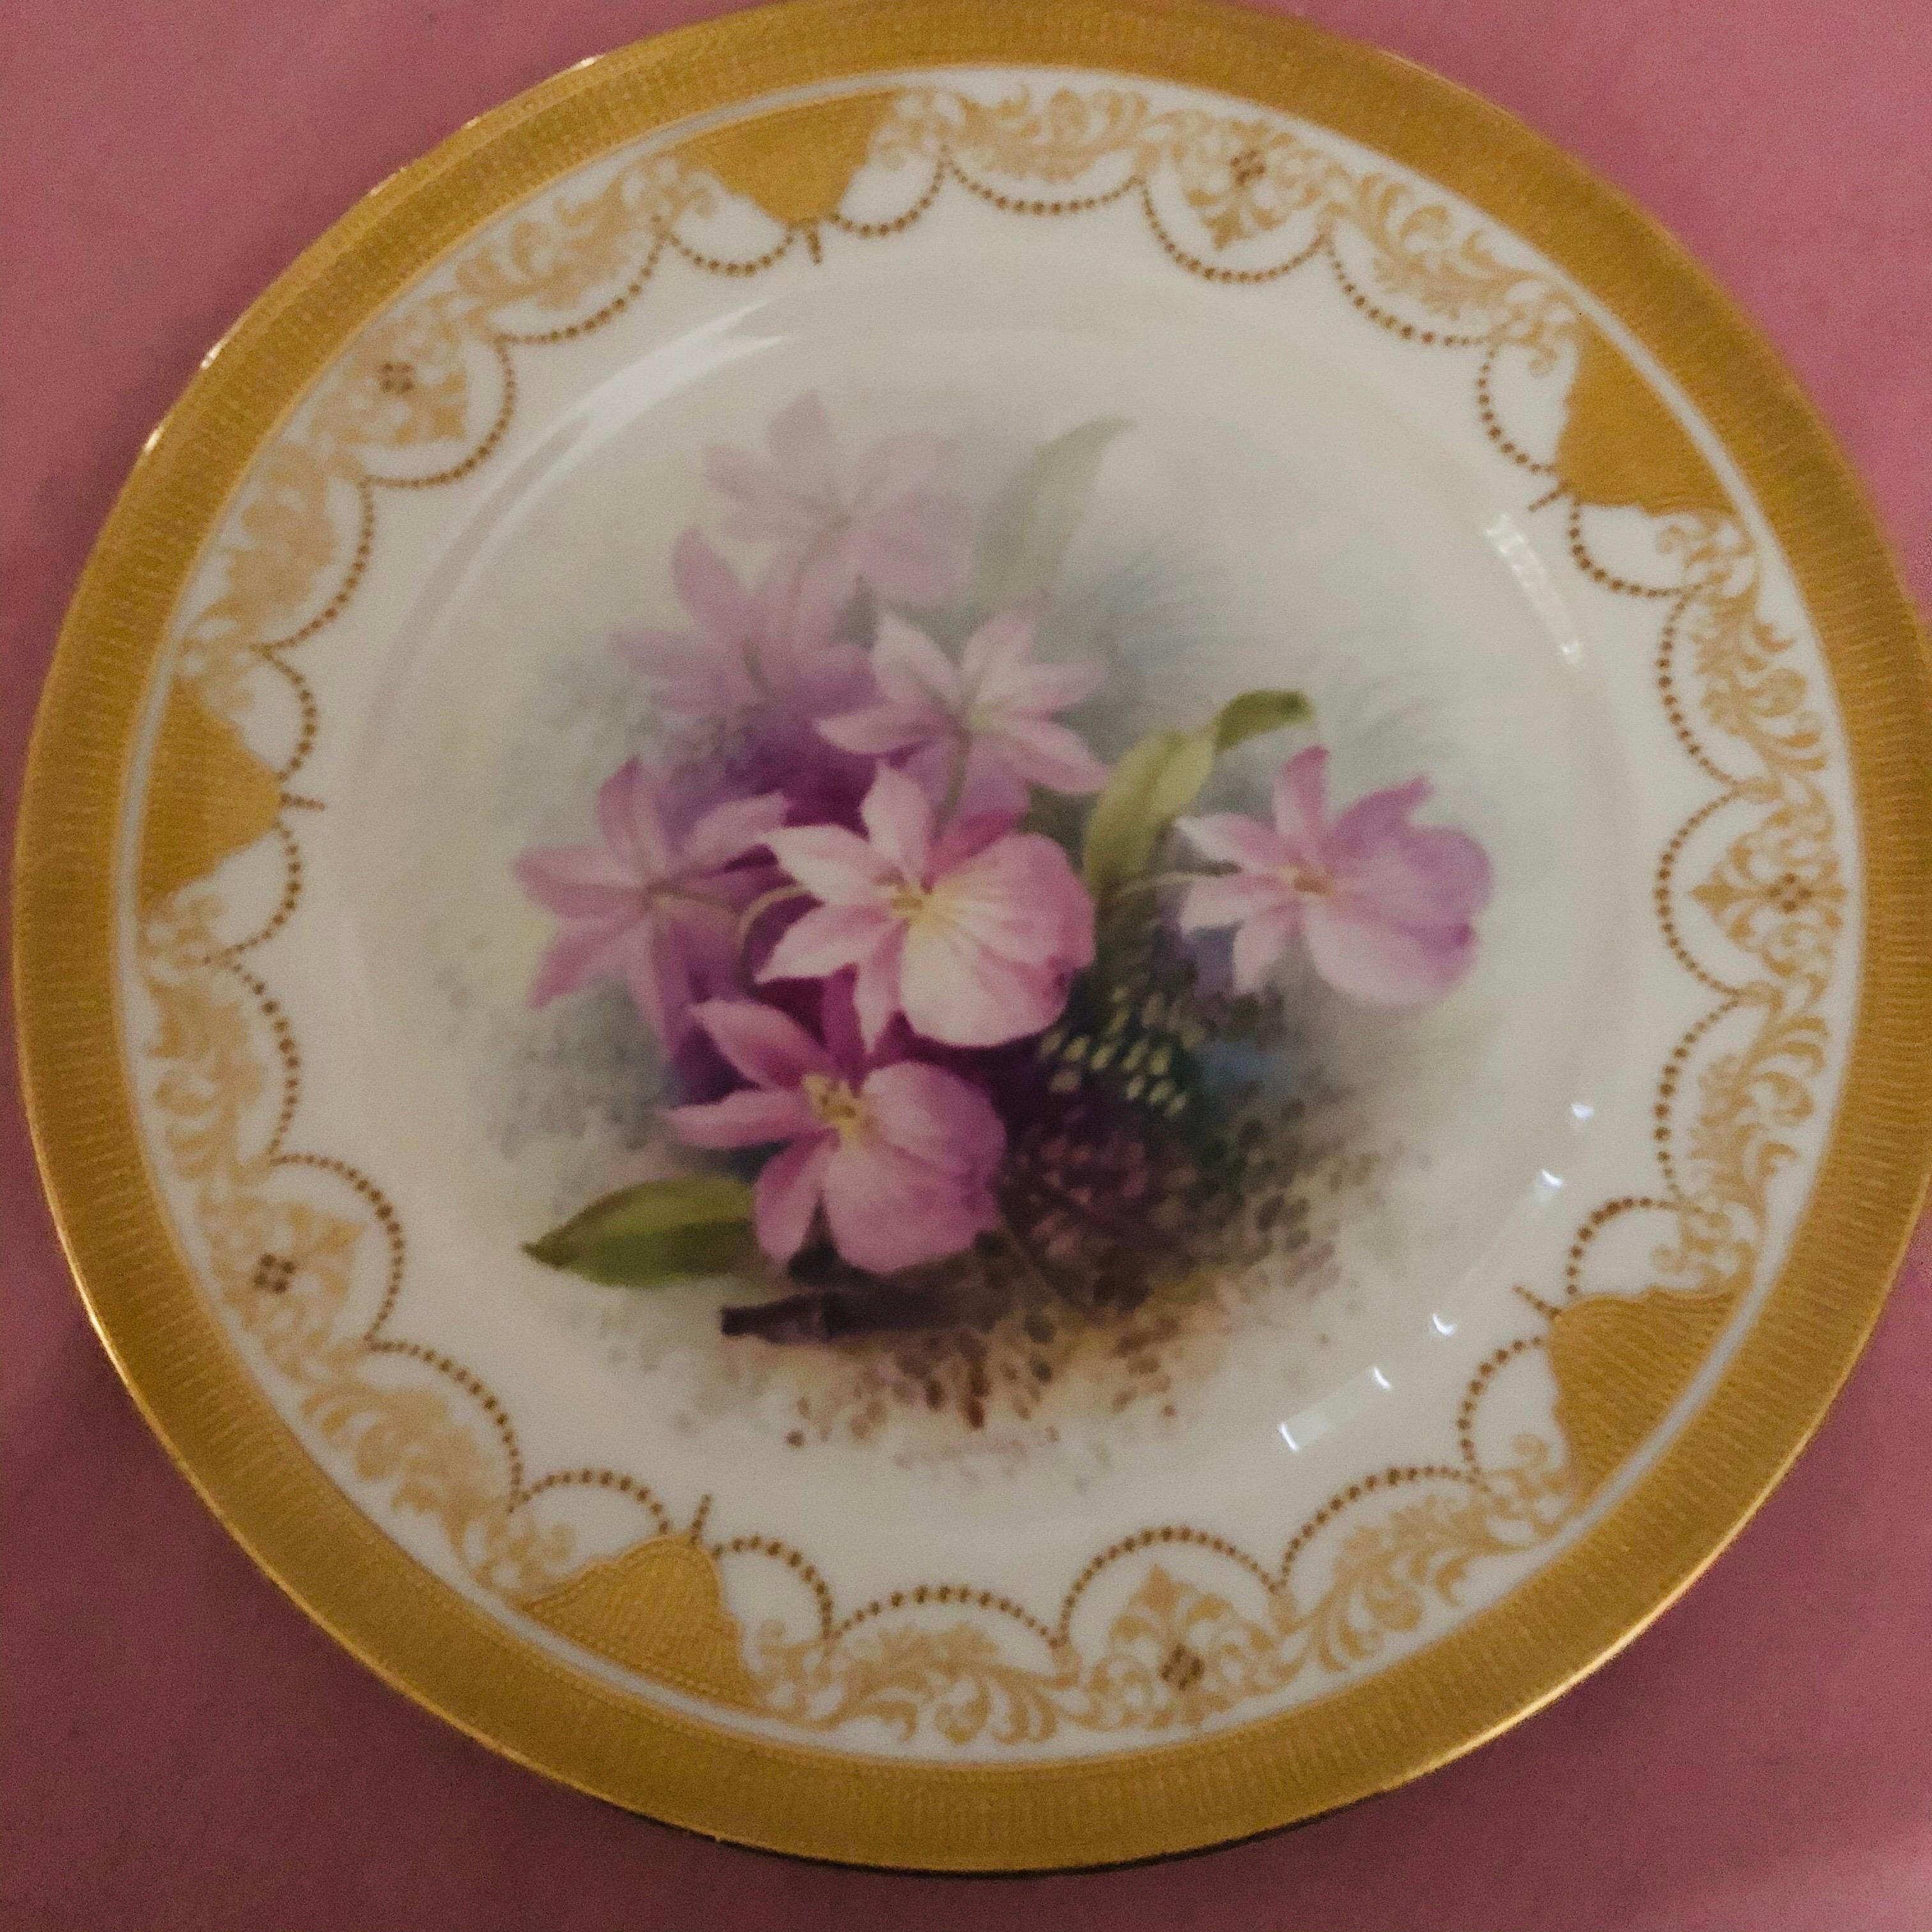 These are a set of 12 Lenox orchid plates from the 1920s. Each one is hand painted with a different orchid by W. H. Morley, who is a famous Lenox artist who specialized in painting flowers. These are museum quality paintings of orchids. There is a